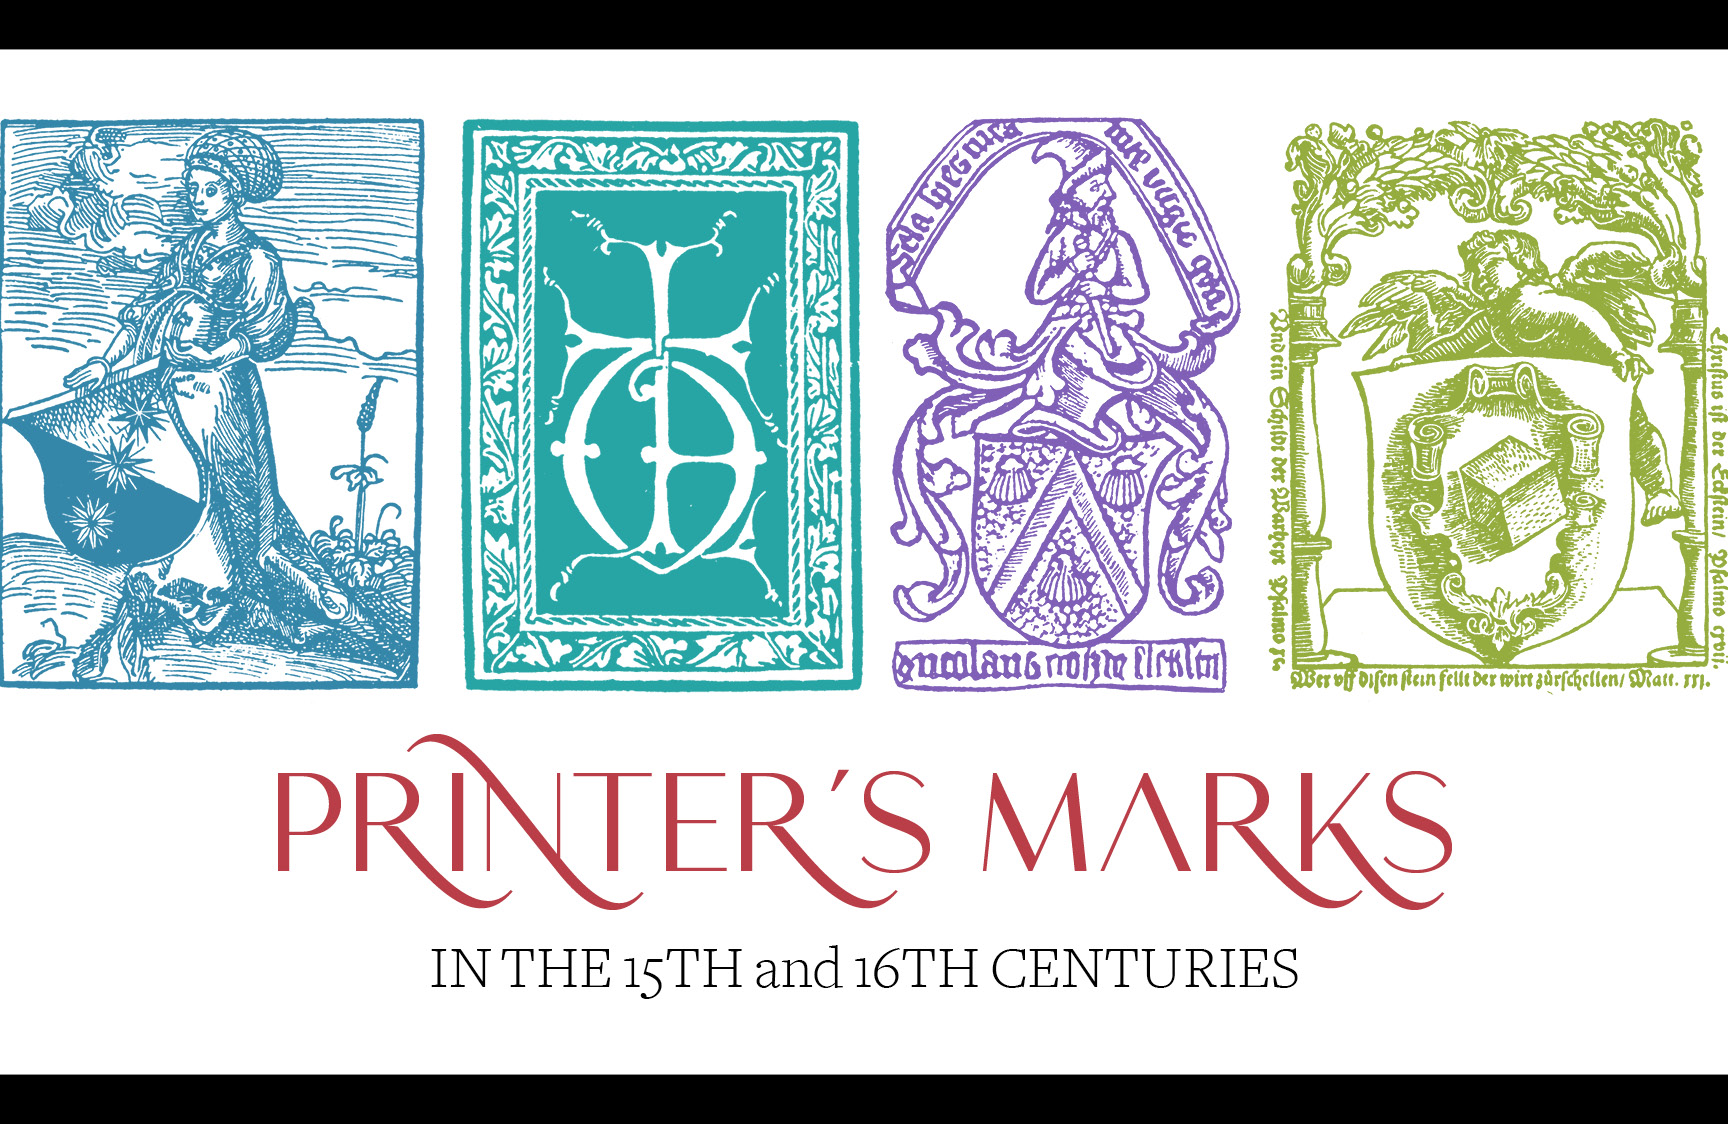 Printer’s Marks from the 15th and 16th Centuries